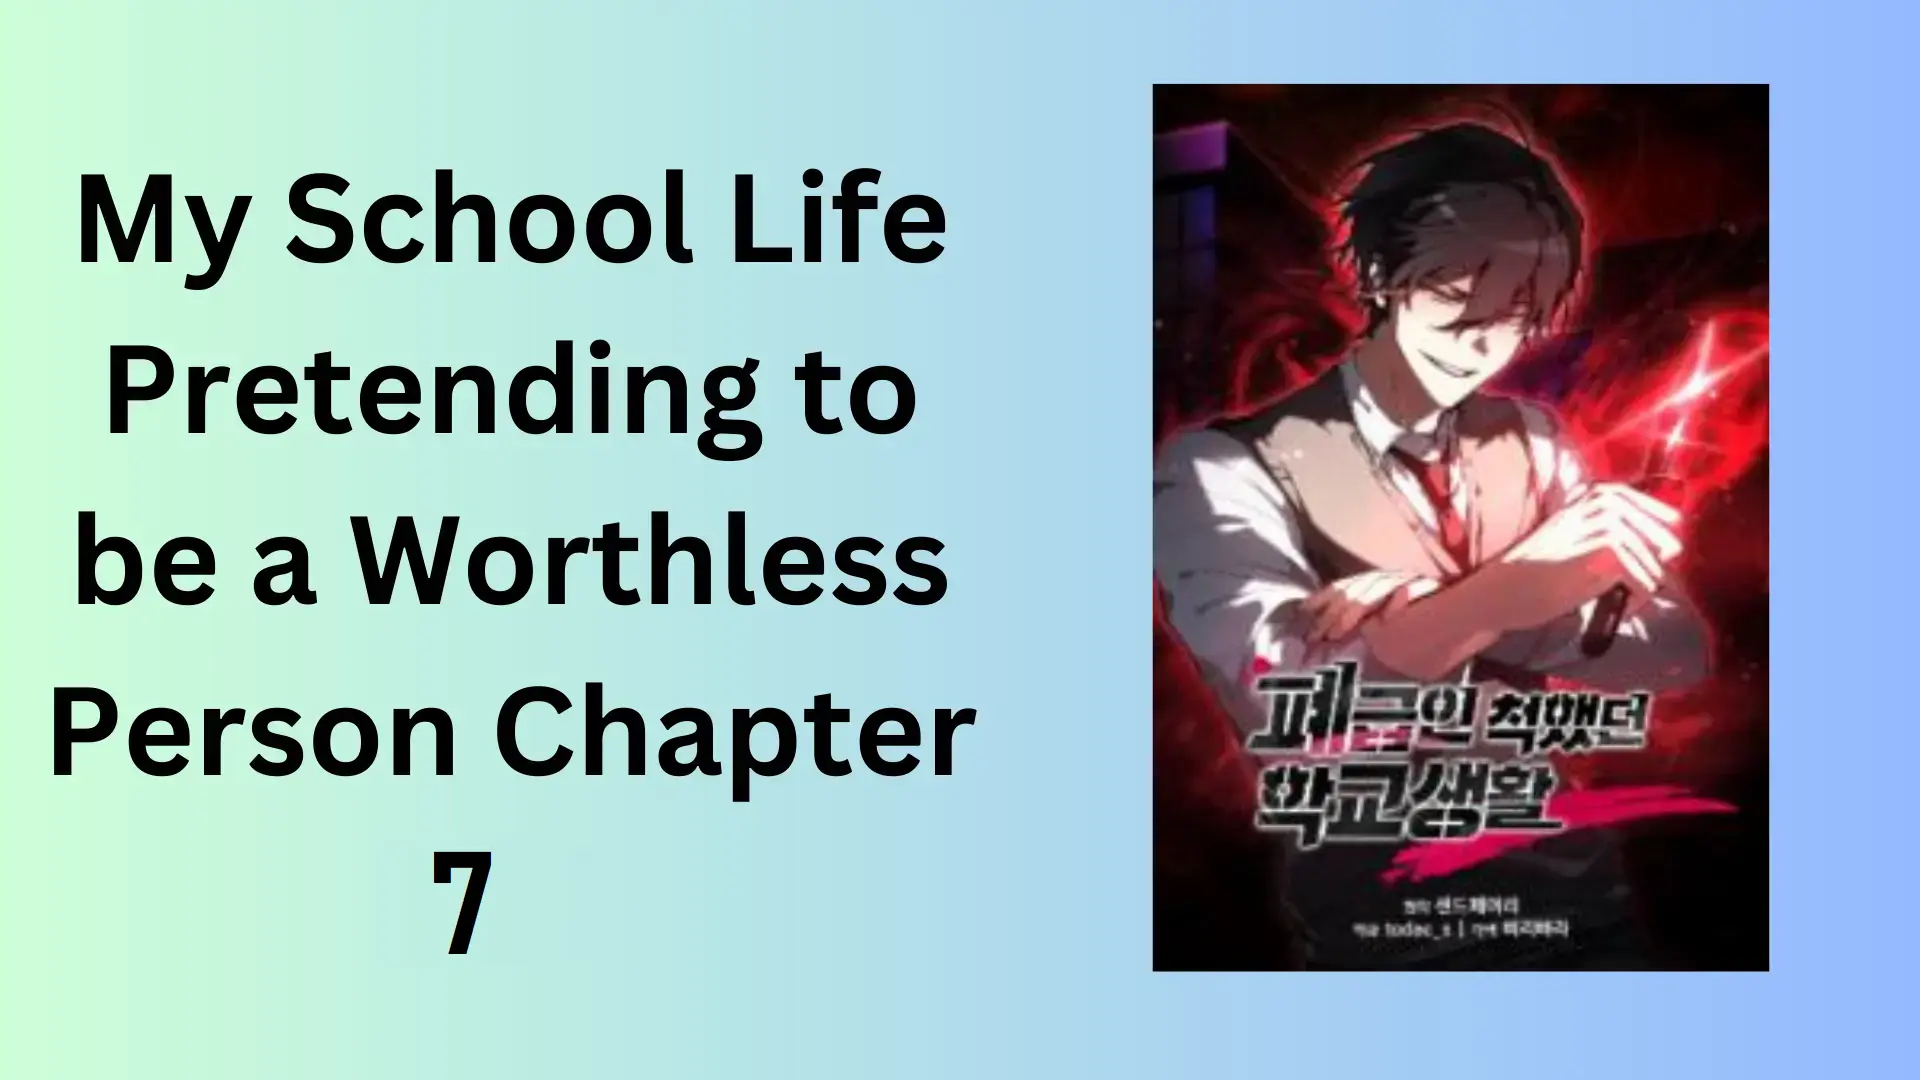 My School Life Pretending to be a Worthless Person Chapter 7